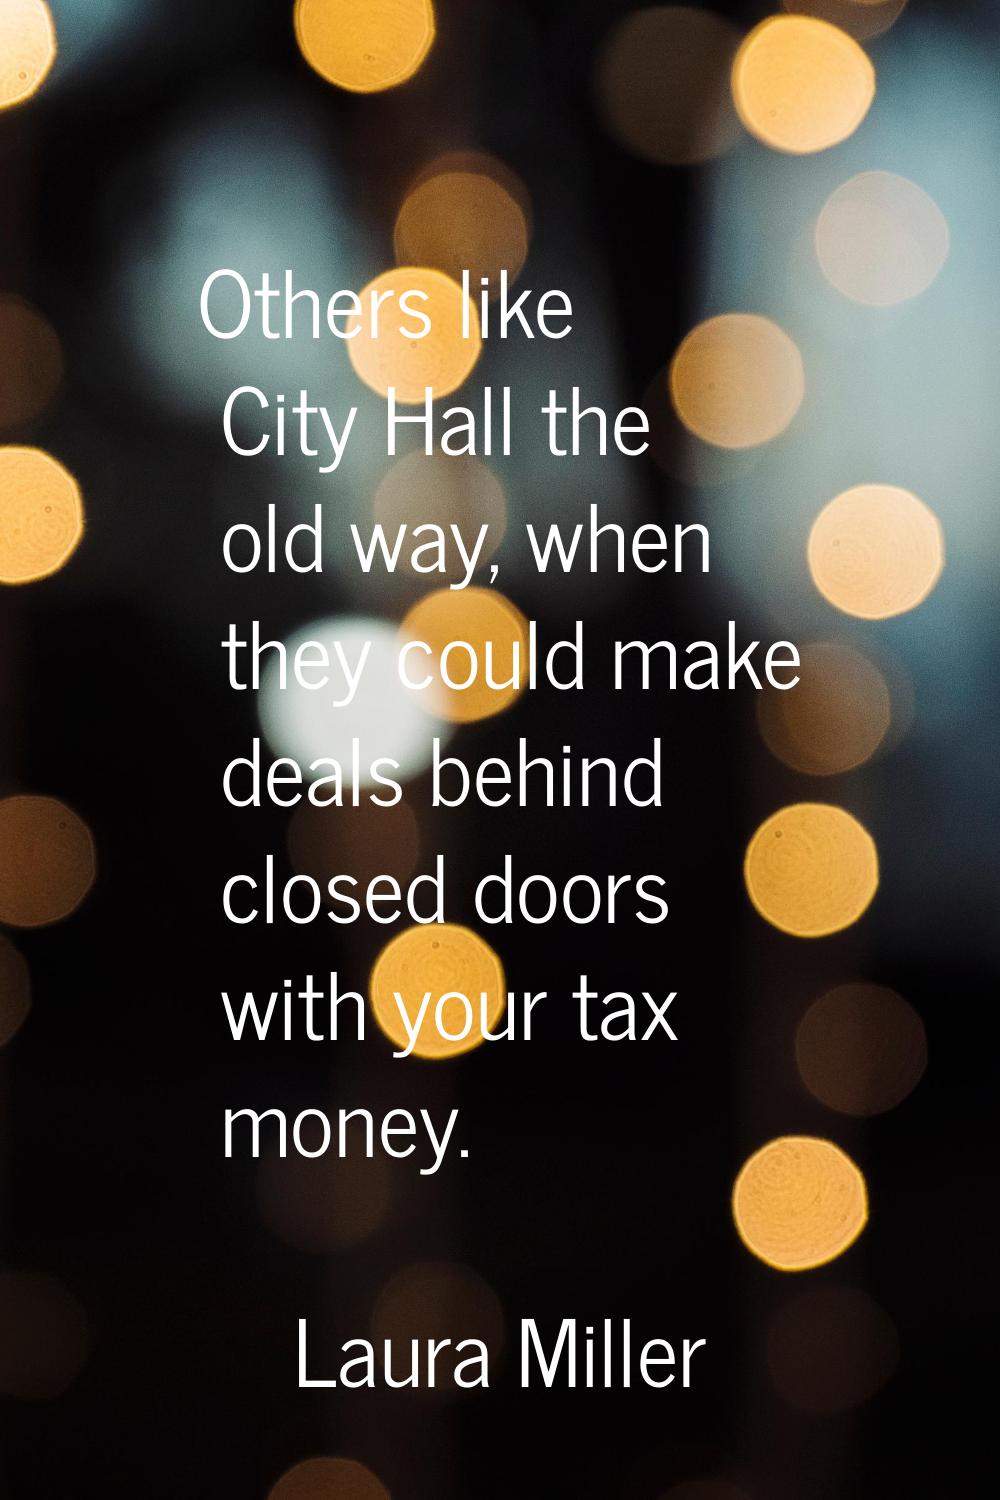 Others like City Hall the old way, when they could make deals behind closed doors with your tax mon